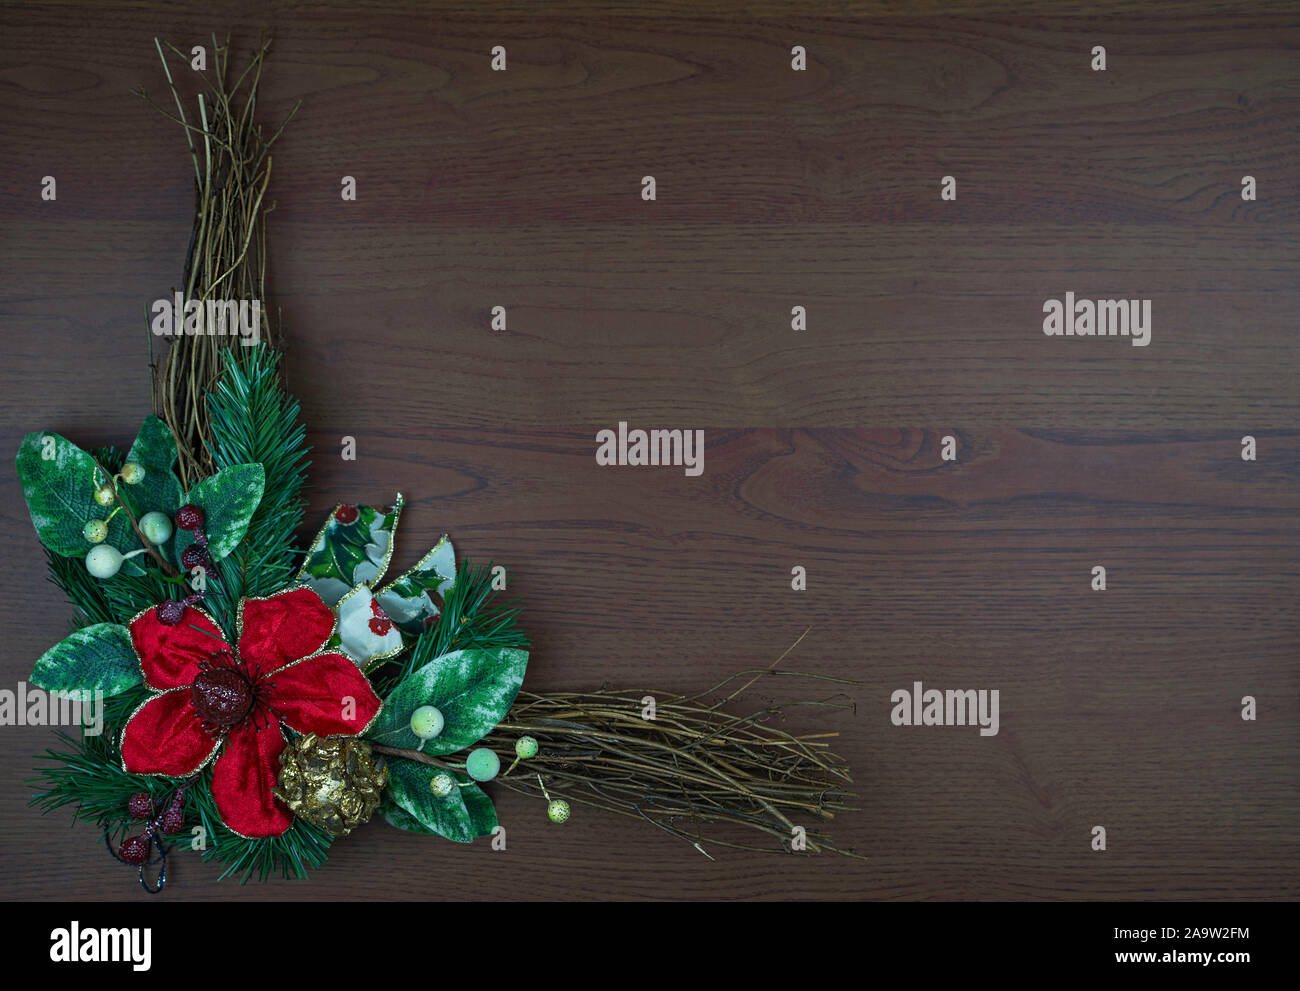 Christmas wreath isolated on wooden background. Big red flower and green leaves and twigs. Space for text or copy. Christmas or New Year. Stock Photo